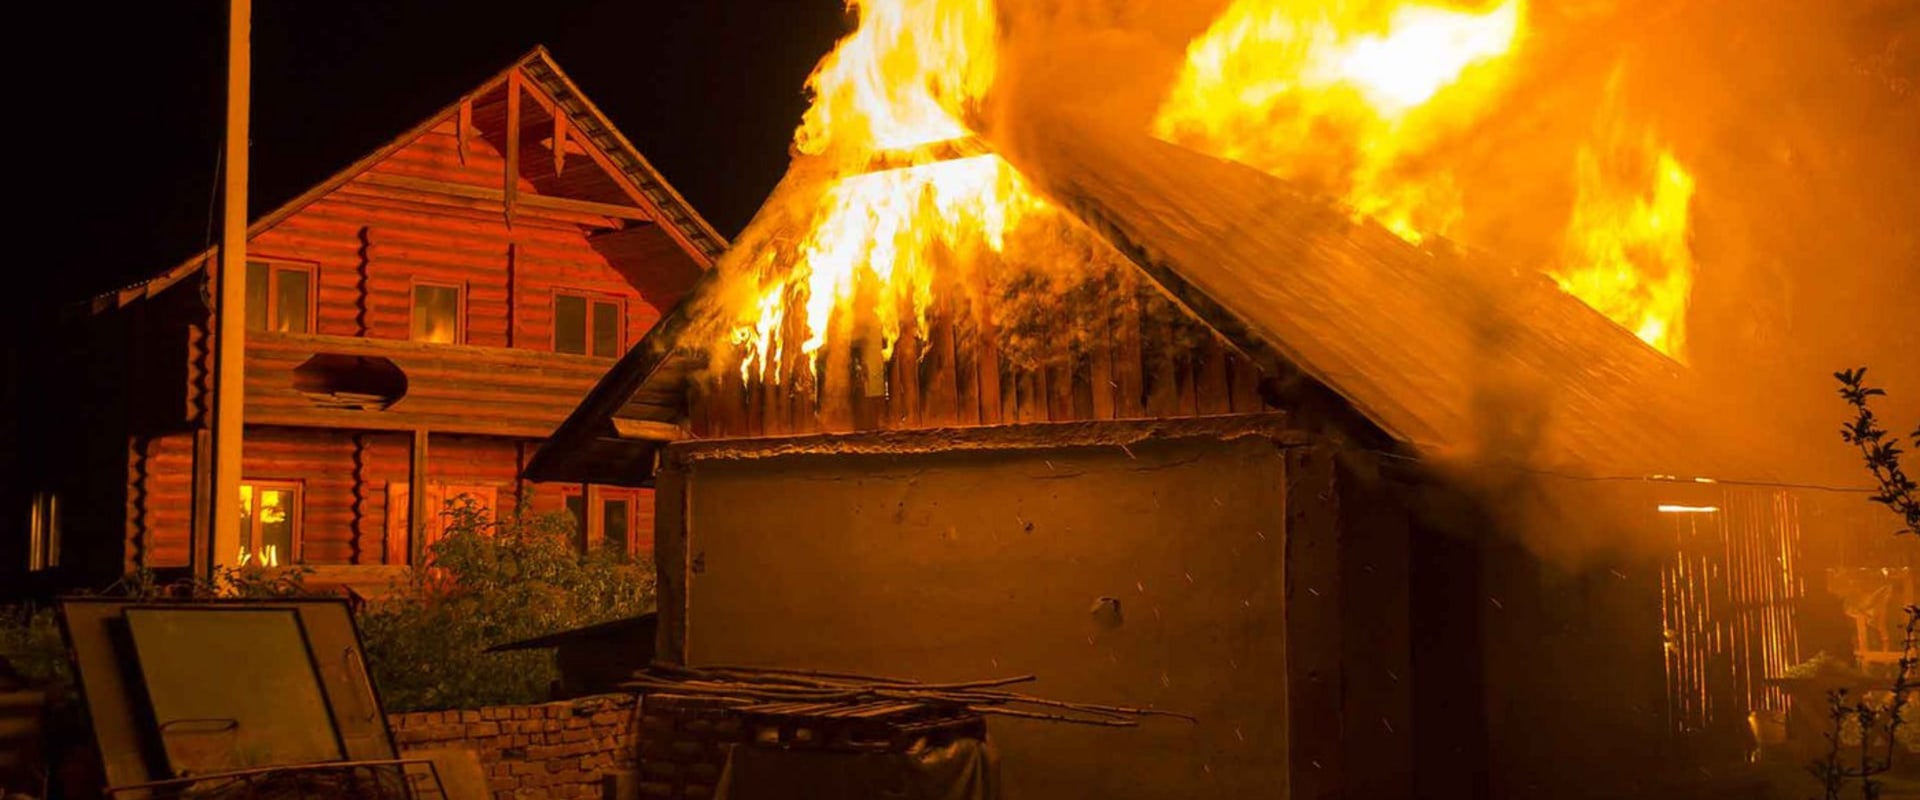 Can roof shingles catch fire?